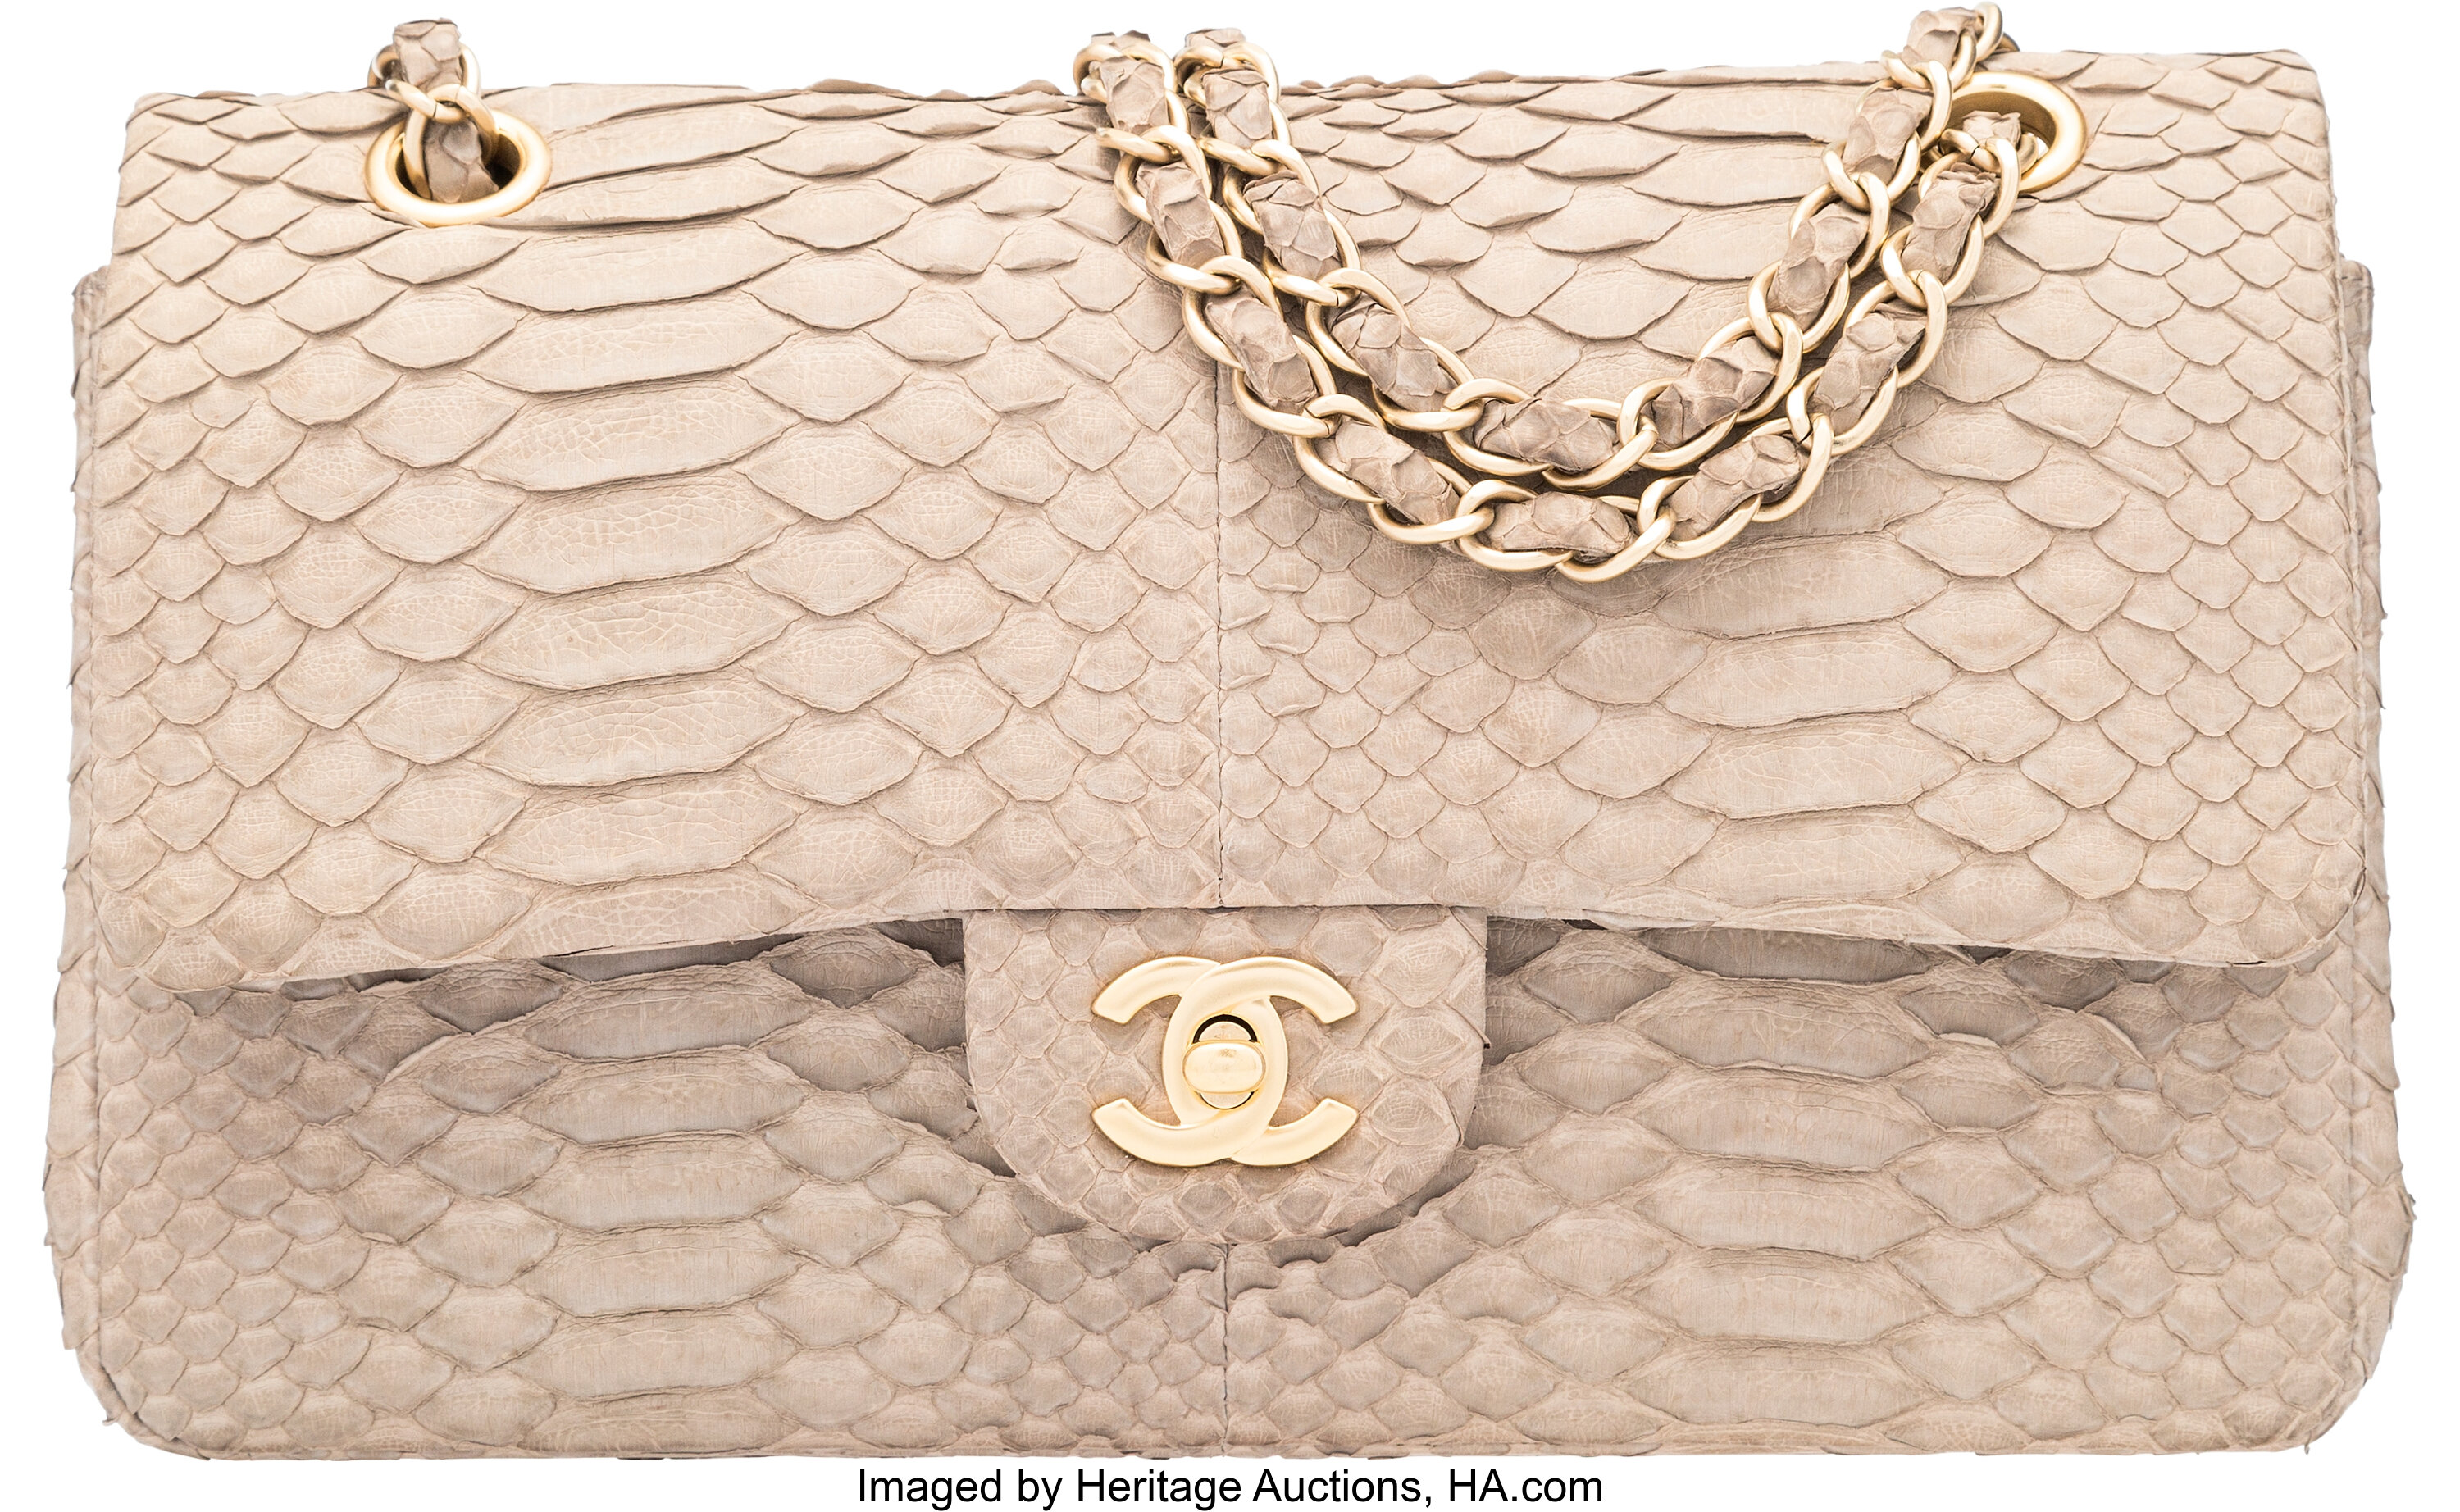 Chanel Beige Python Medium Double Flap Bag with Gold Hardware., Lot #58067